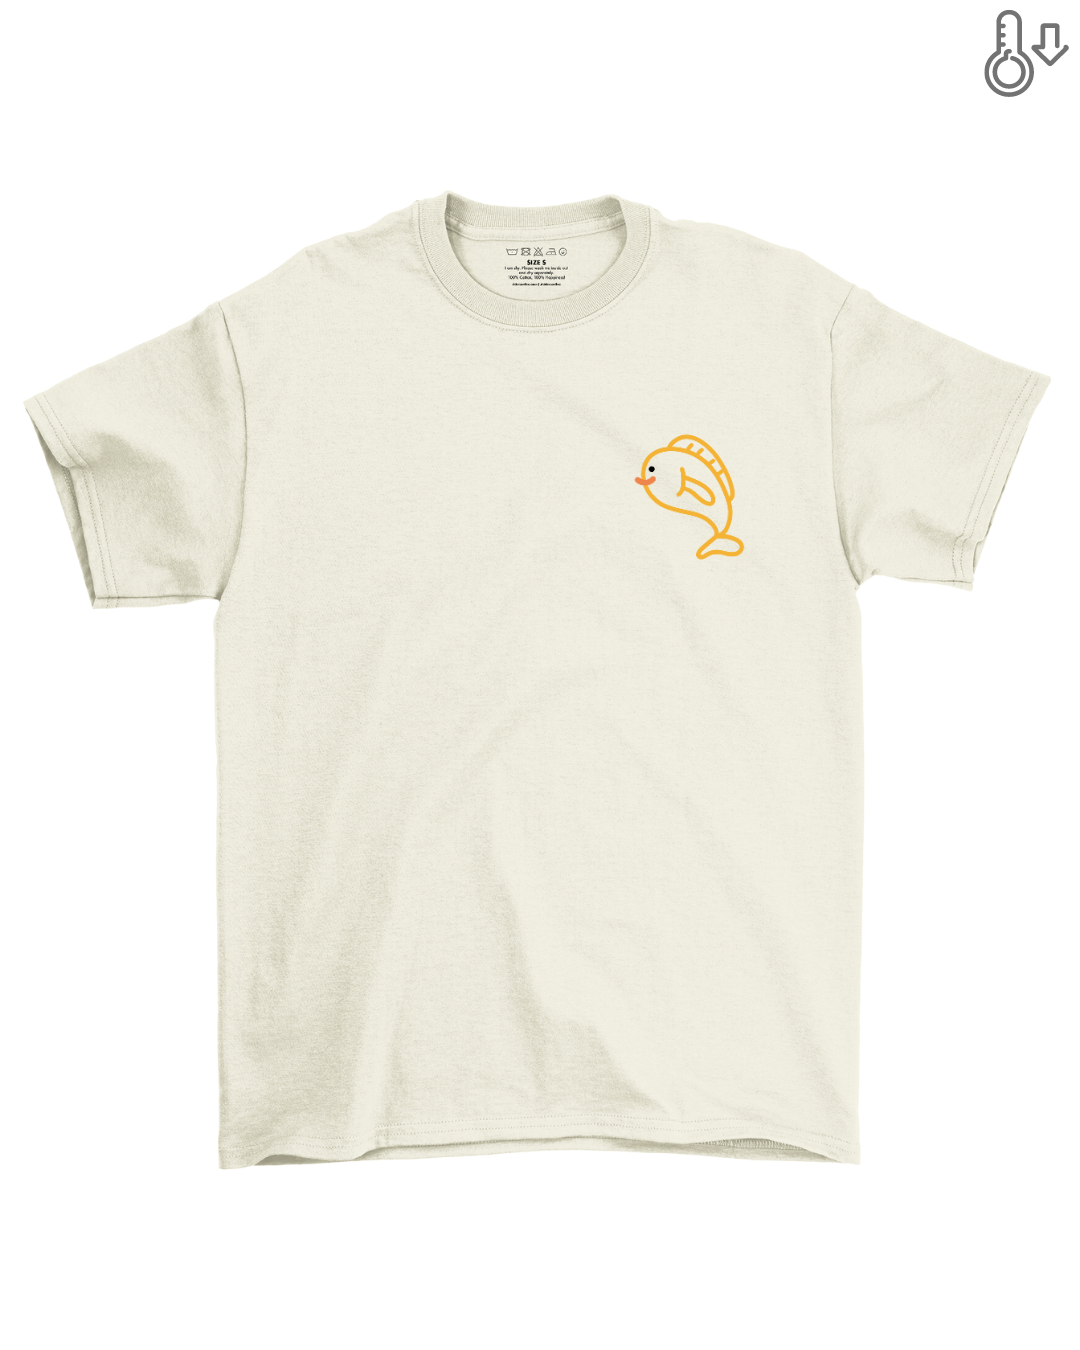 Lucky Fishes Oversized Tee in Cream